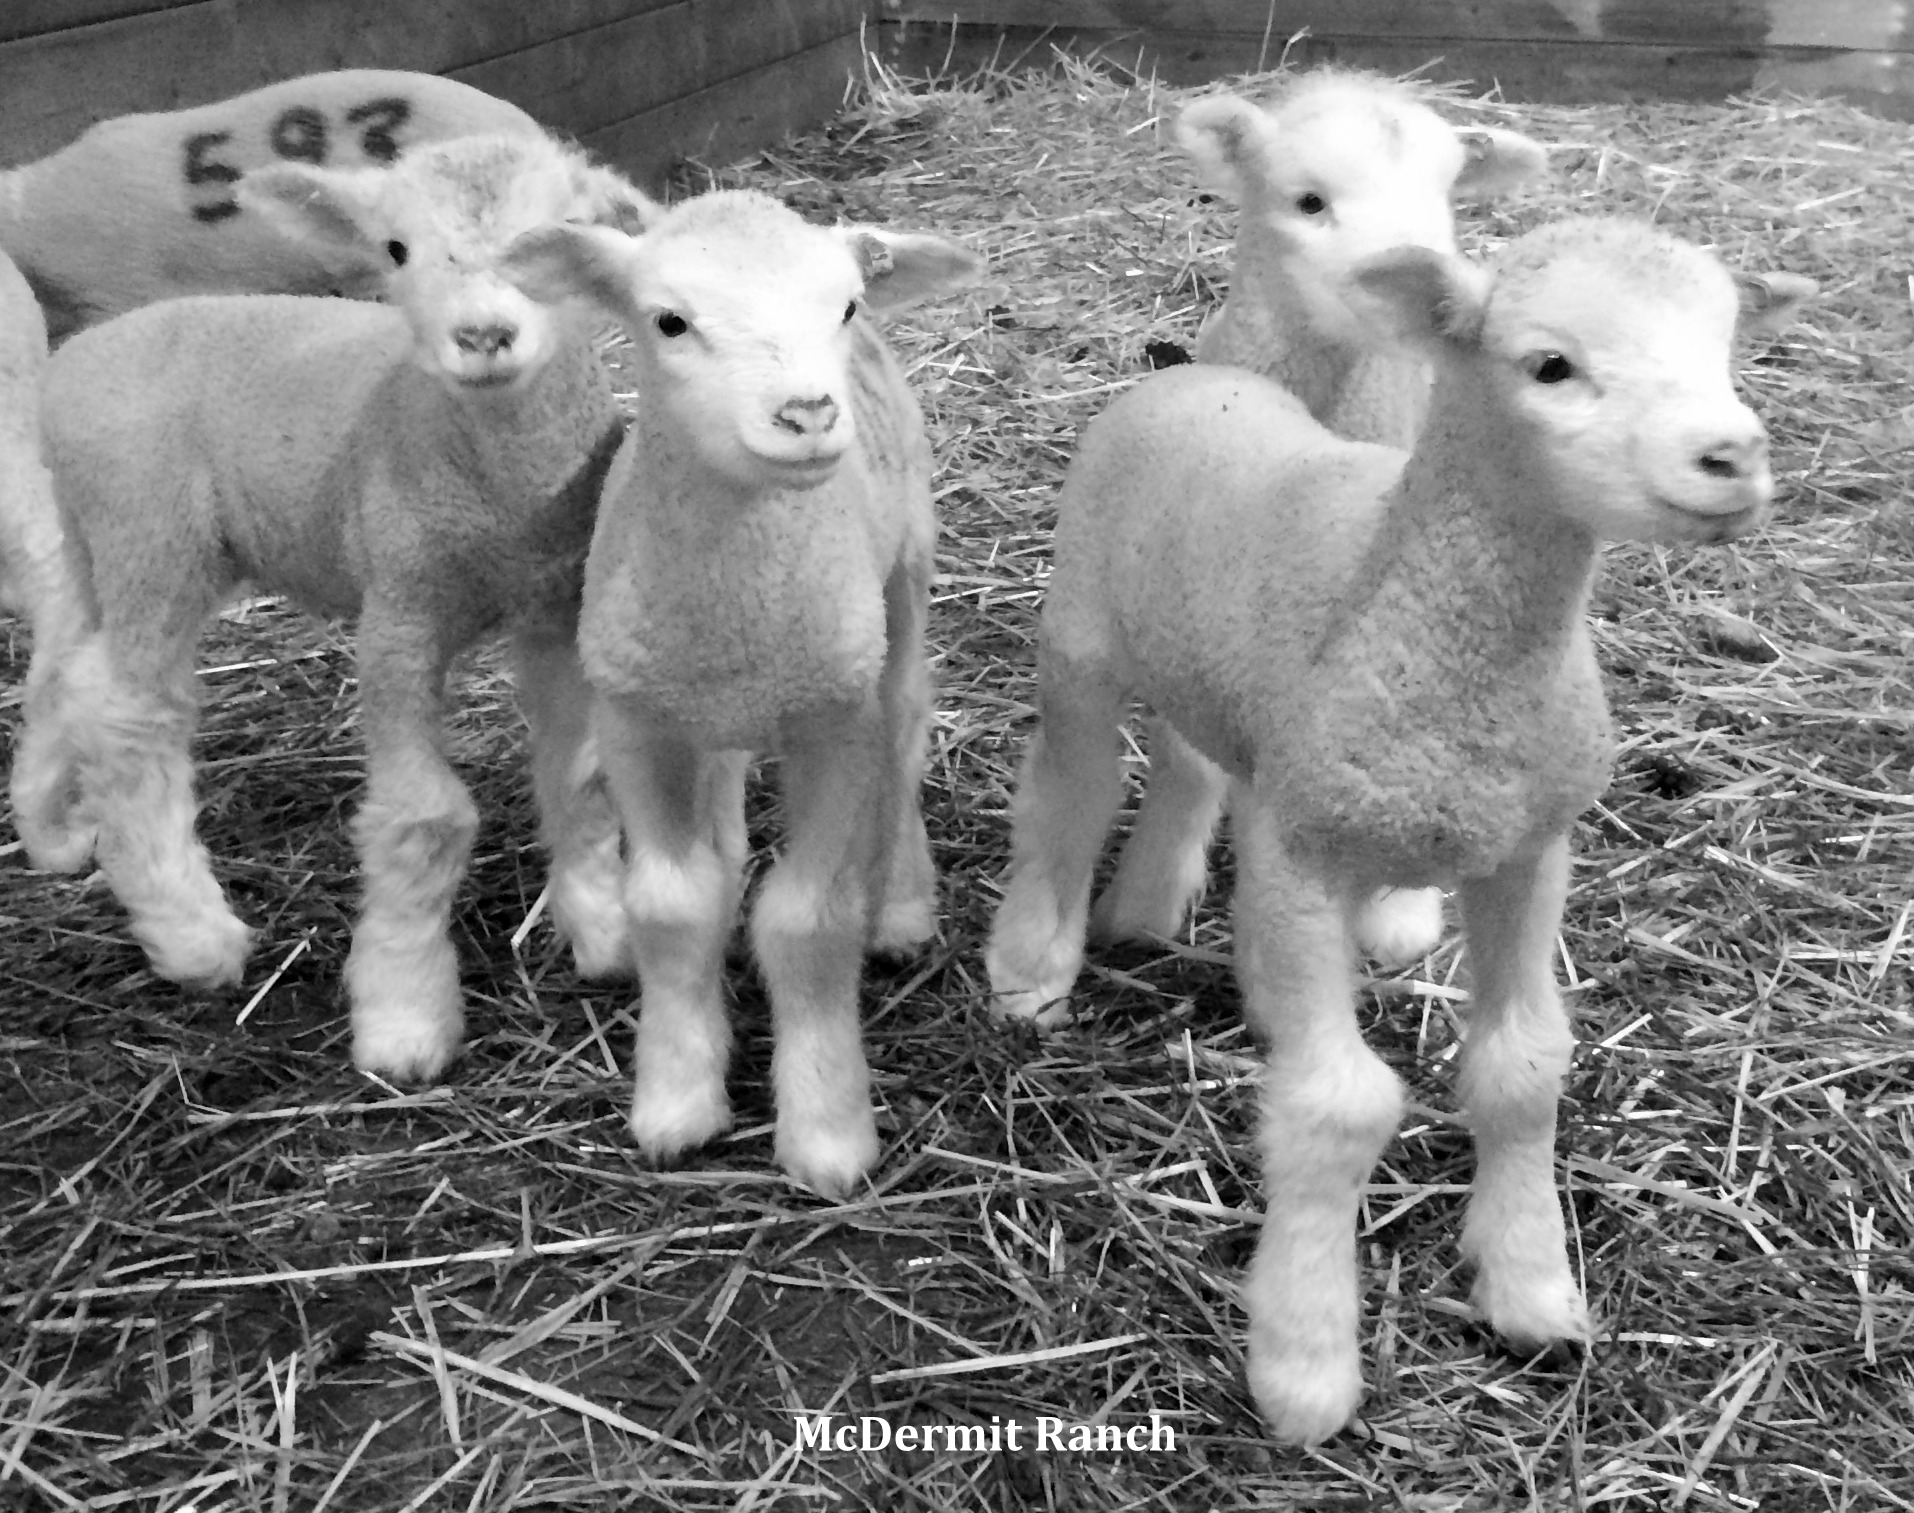 Five day old Dorset lambs.